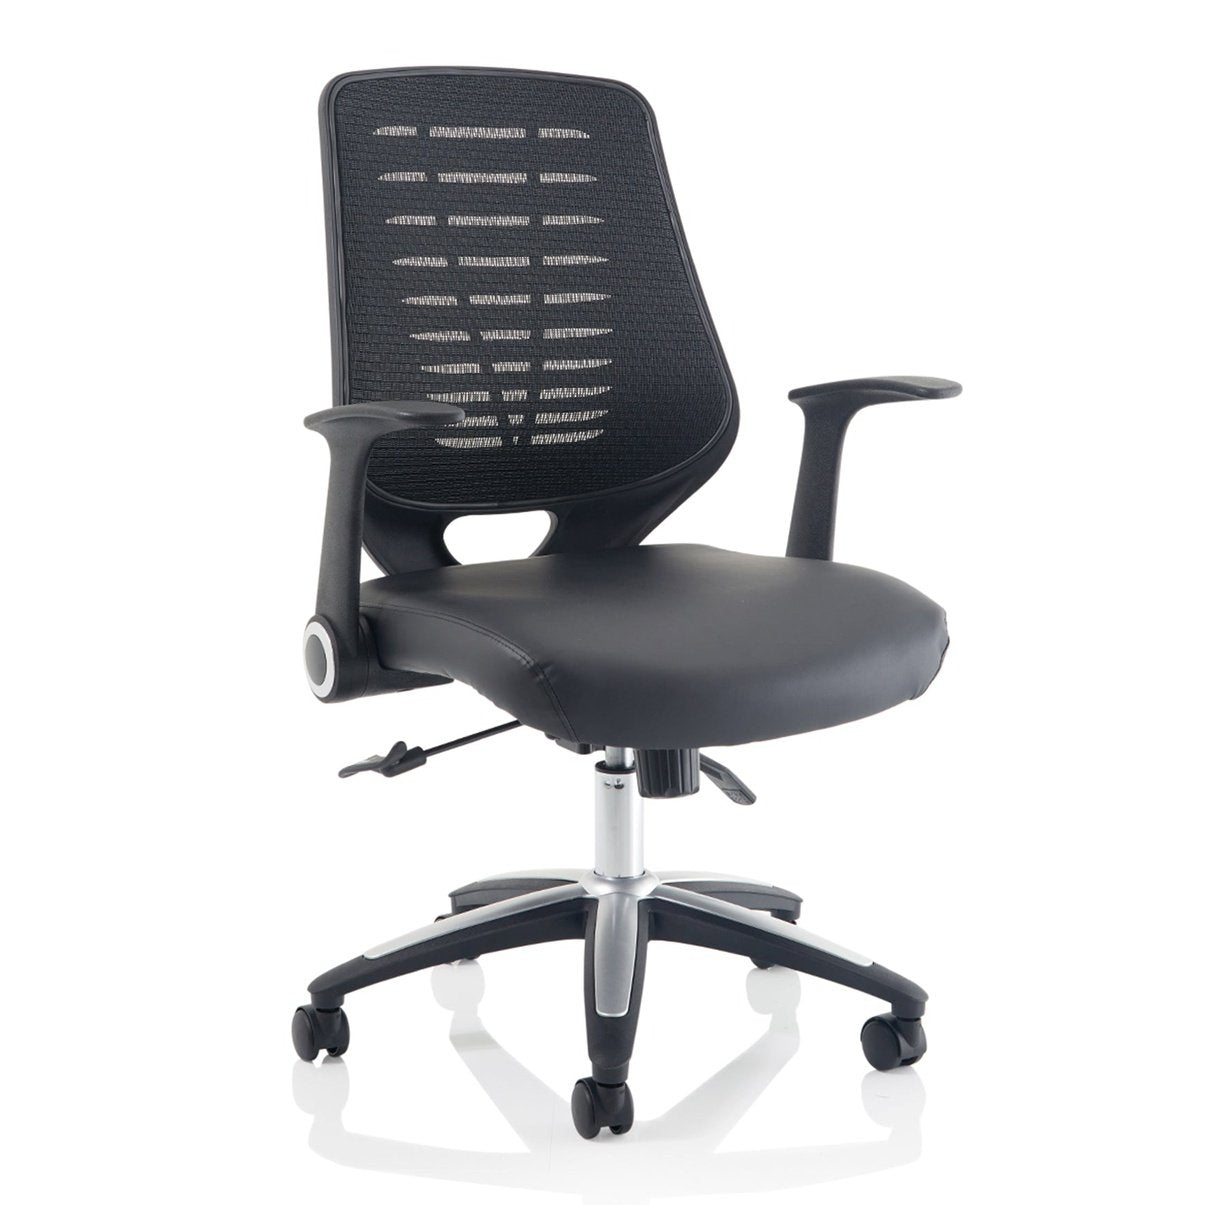 Relay Medium Mesh Back Office Chair - Task Operator Chair with Adjustable Arms, Metal & Plastic Frame, 110kg Capacity, 8hr Usage - Flat Packed